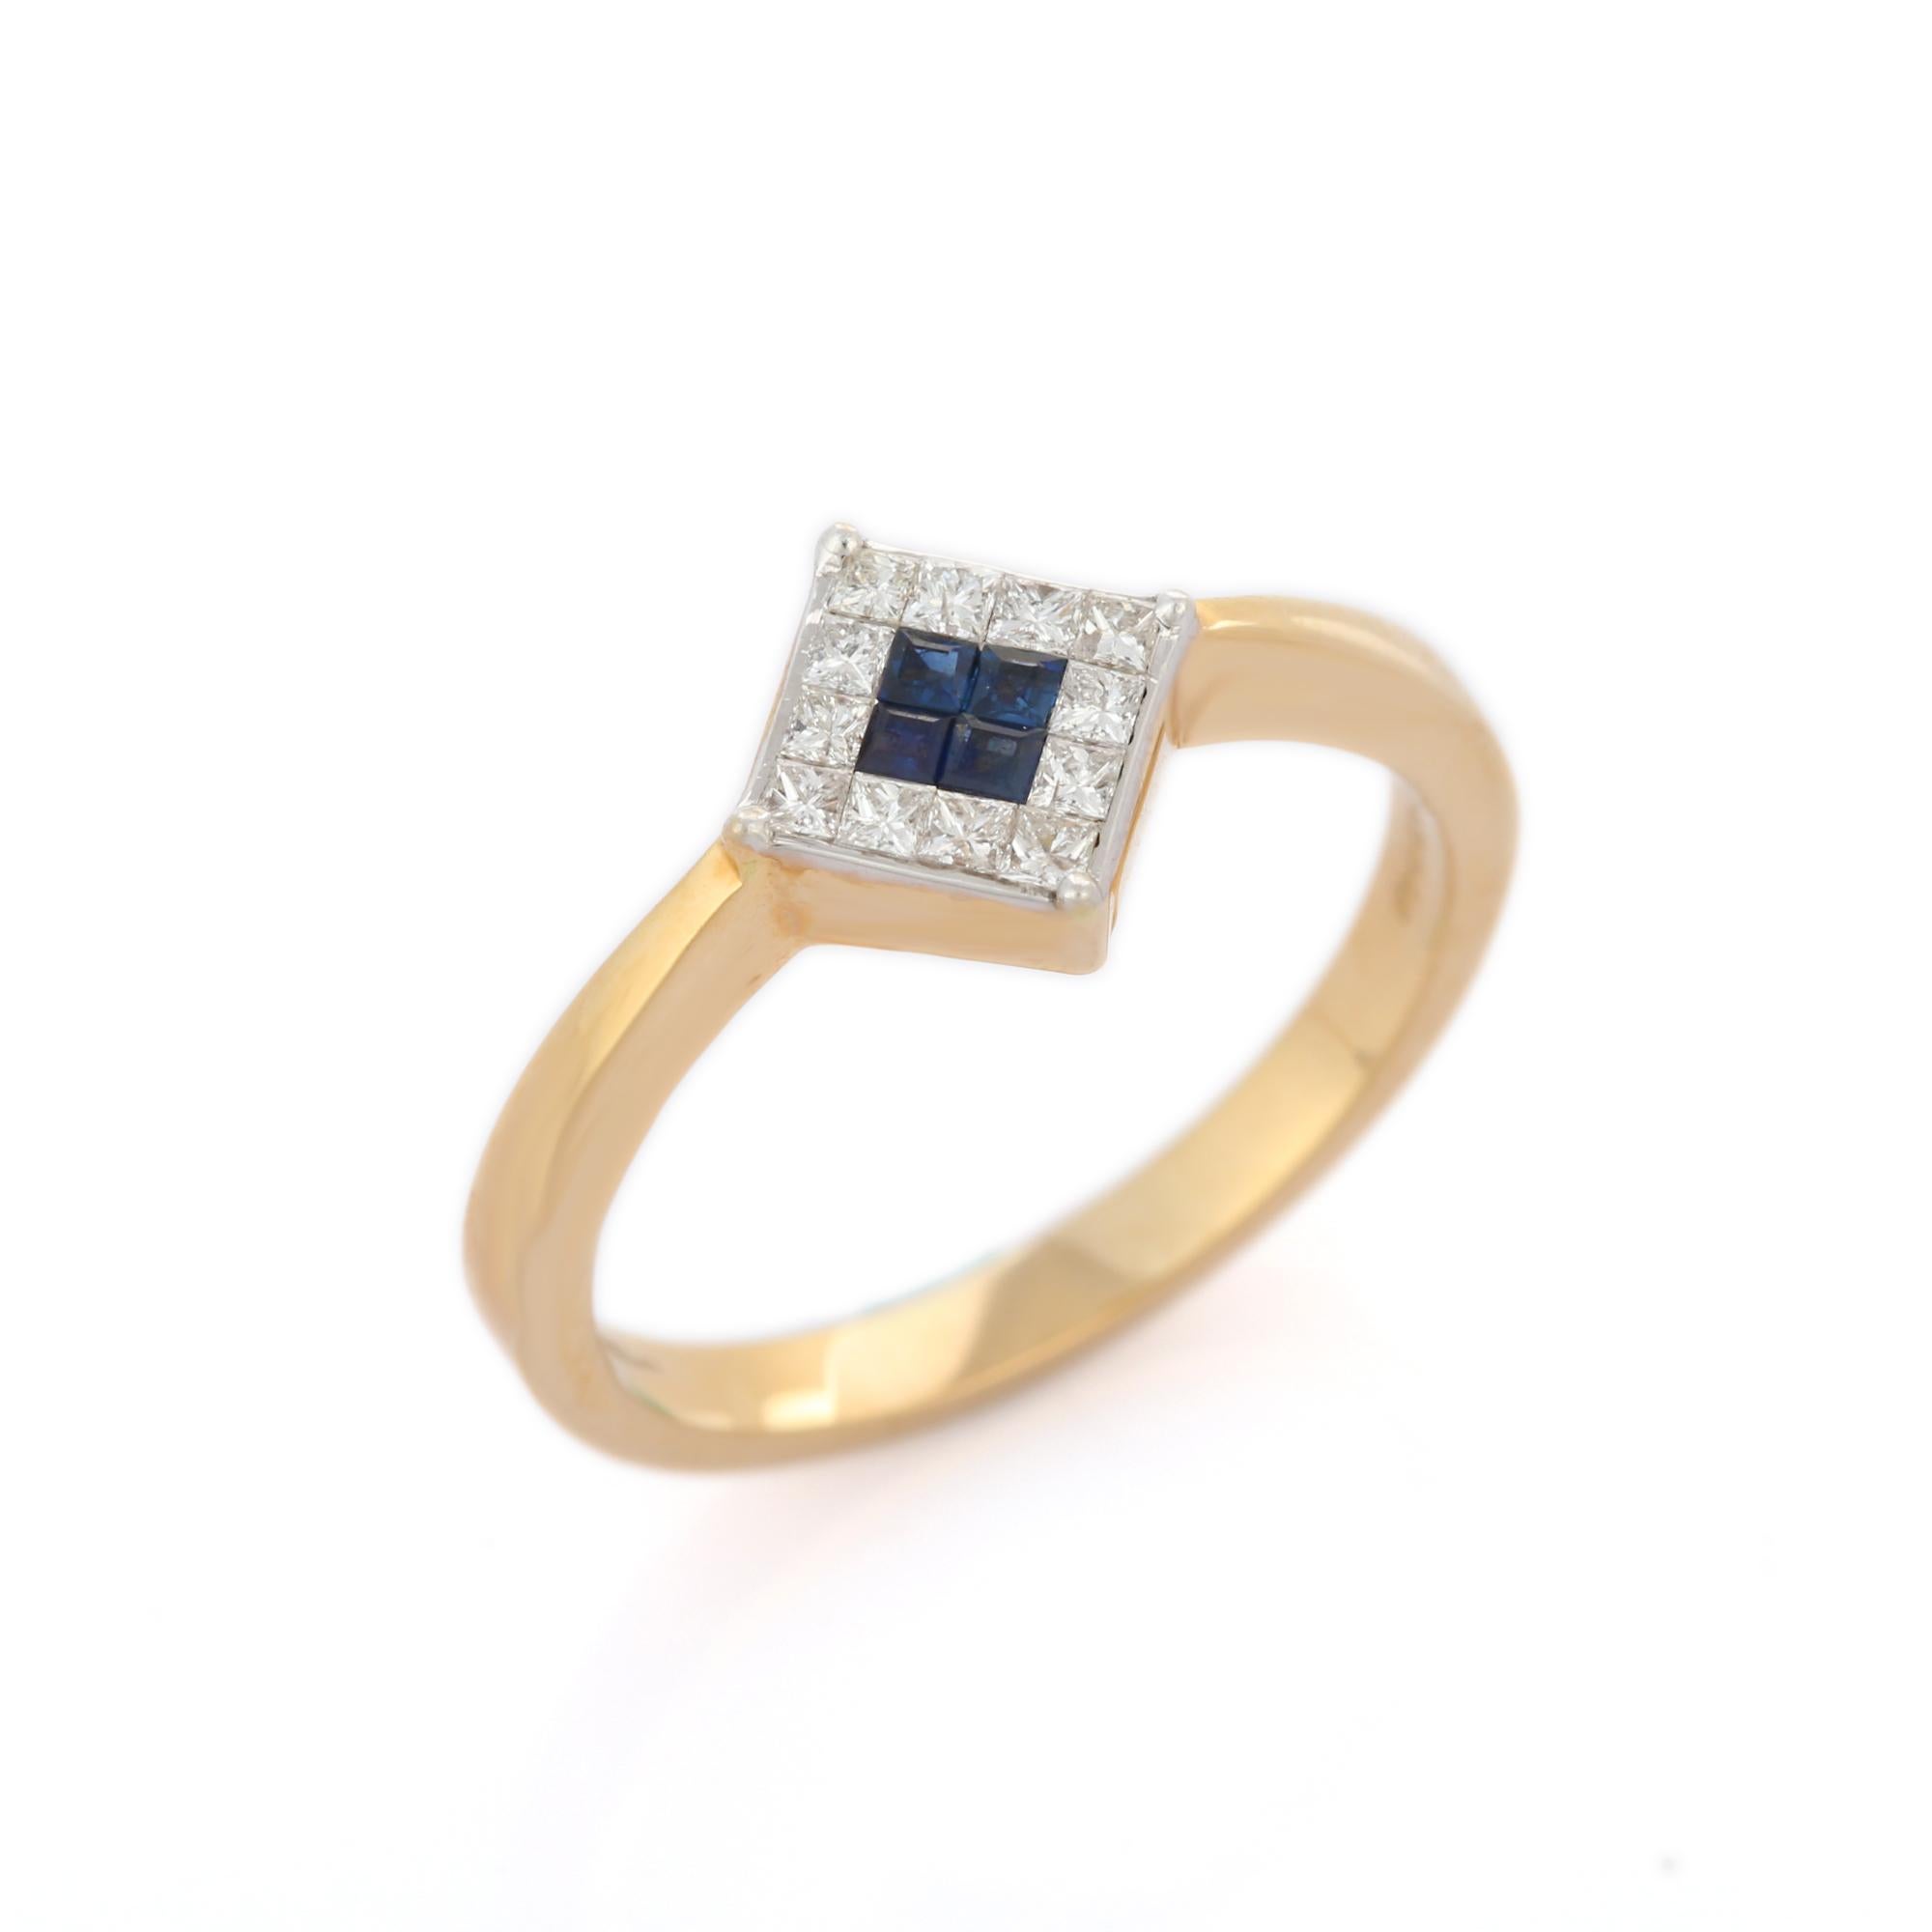 For Sale:  Natural Blue Sapphire Diamond Dainty Square Ring Set in 18k Solid Yellow Gold 5